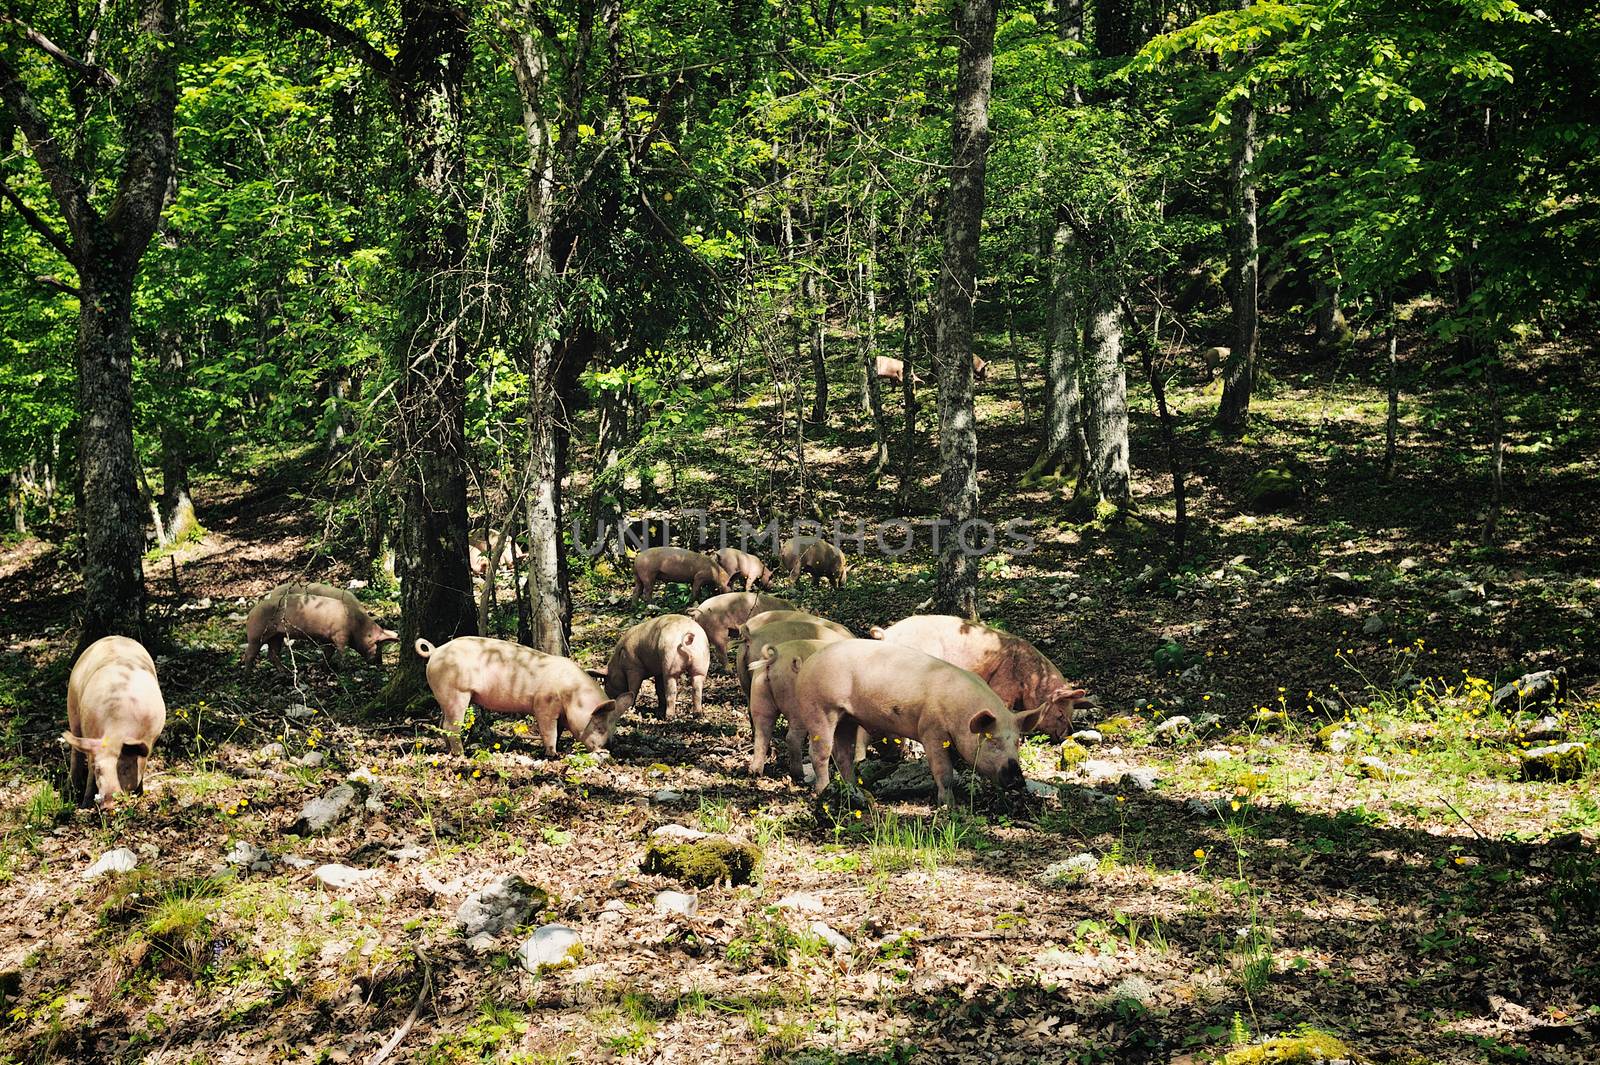 Herd pigs eating acorns of oaks in the forest